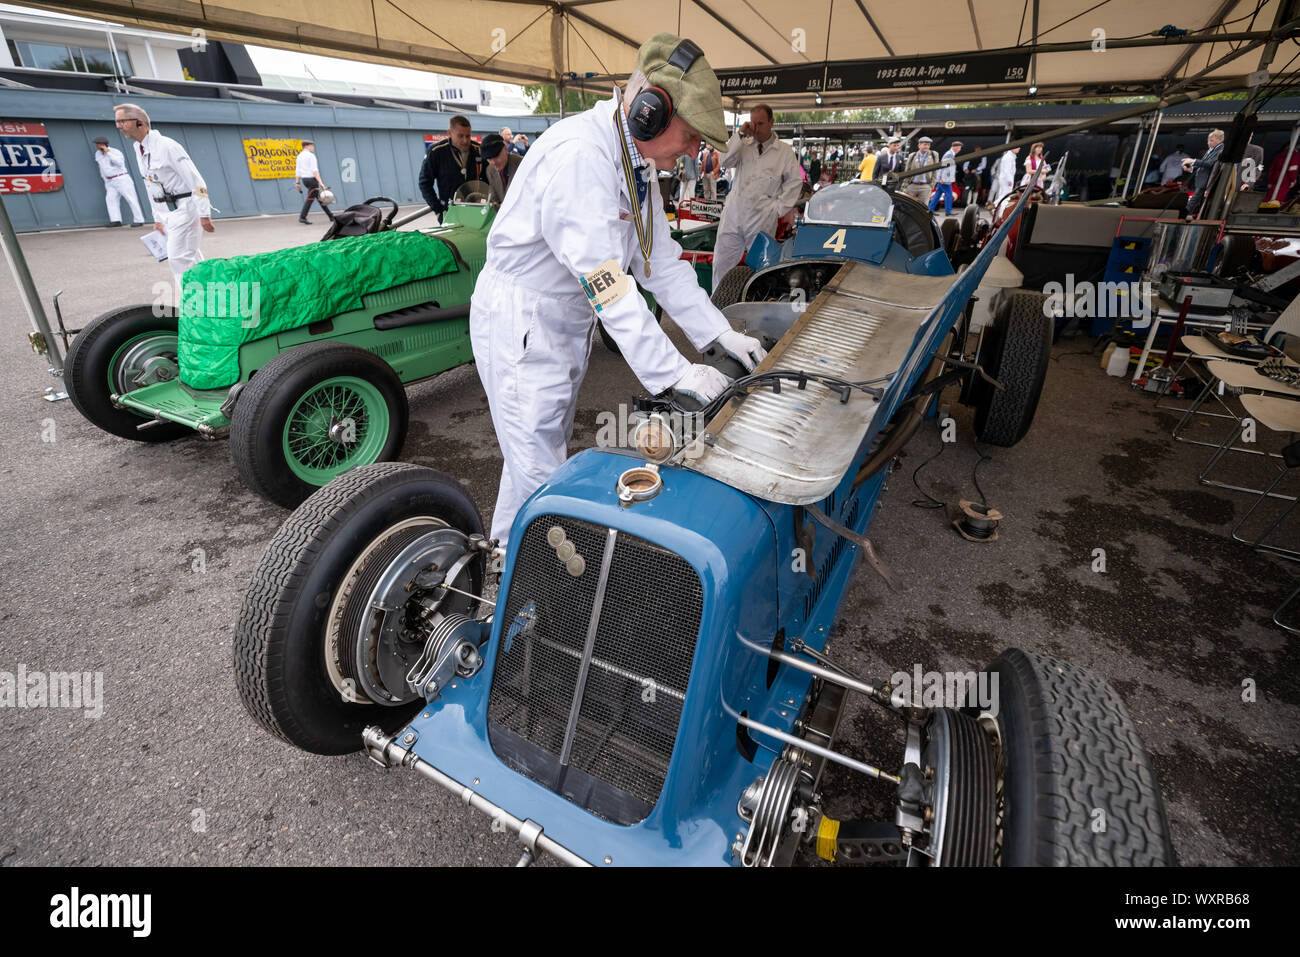 Vintage cars from the 1930's to the 1950's in the paddock during the Goodwood Revival car festival, UK. Stock Photo